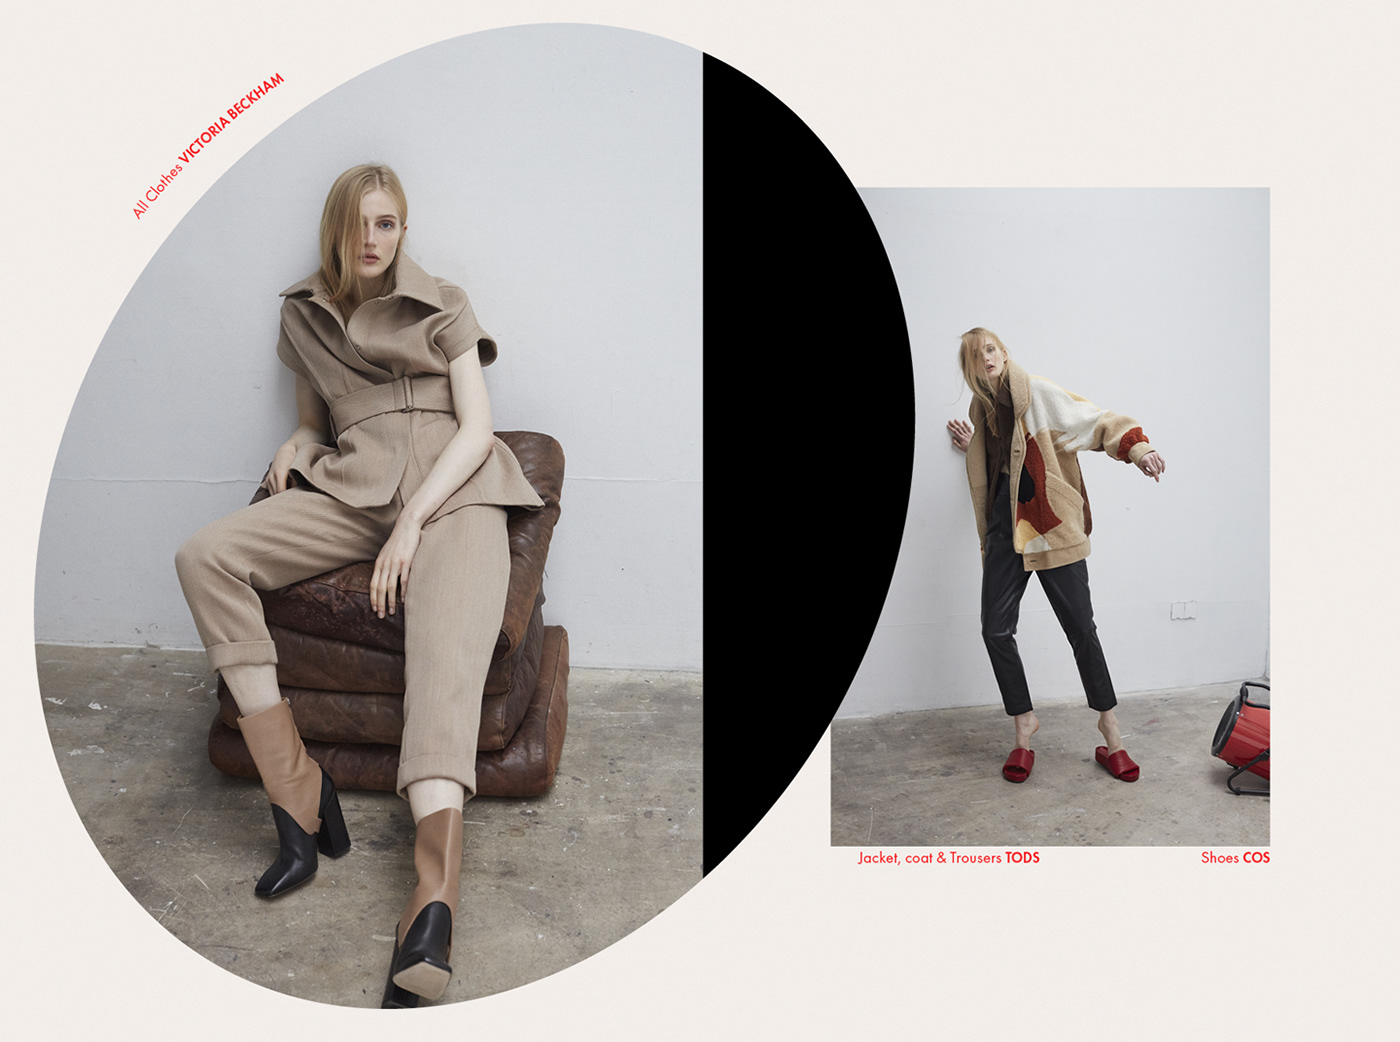 editorial Fashion  Photography  design Layout composition minimalist typography   minimal storiescollective